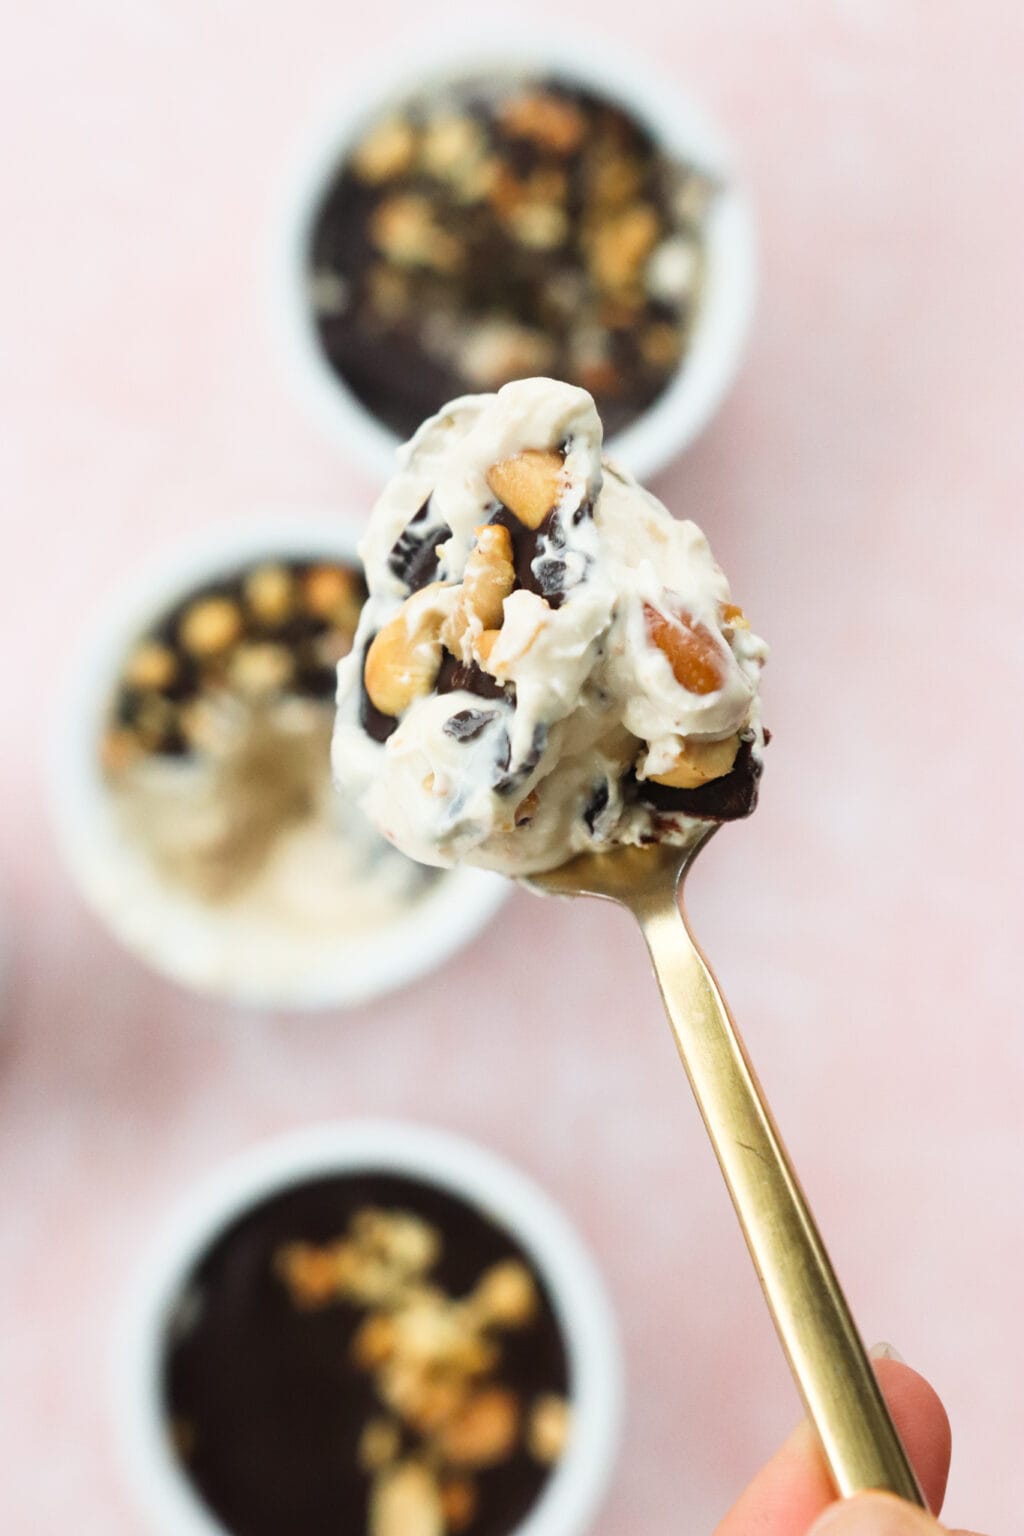 A spoonful of Peanut Butter & Greek Yogurt Cups with Magic Chocolate Shell on a gold spoon with three bowls in the background